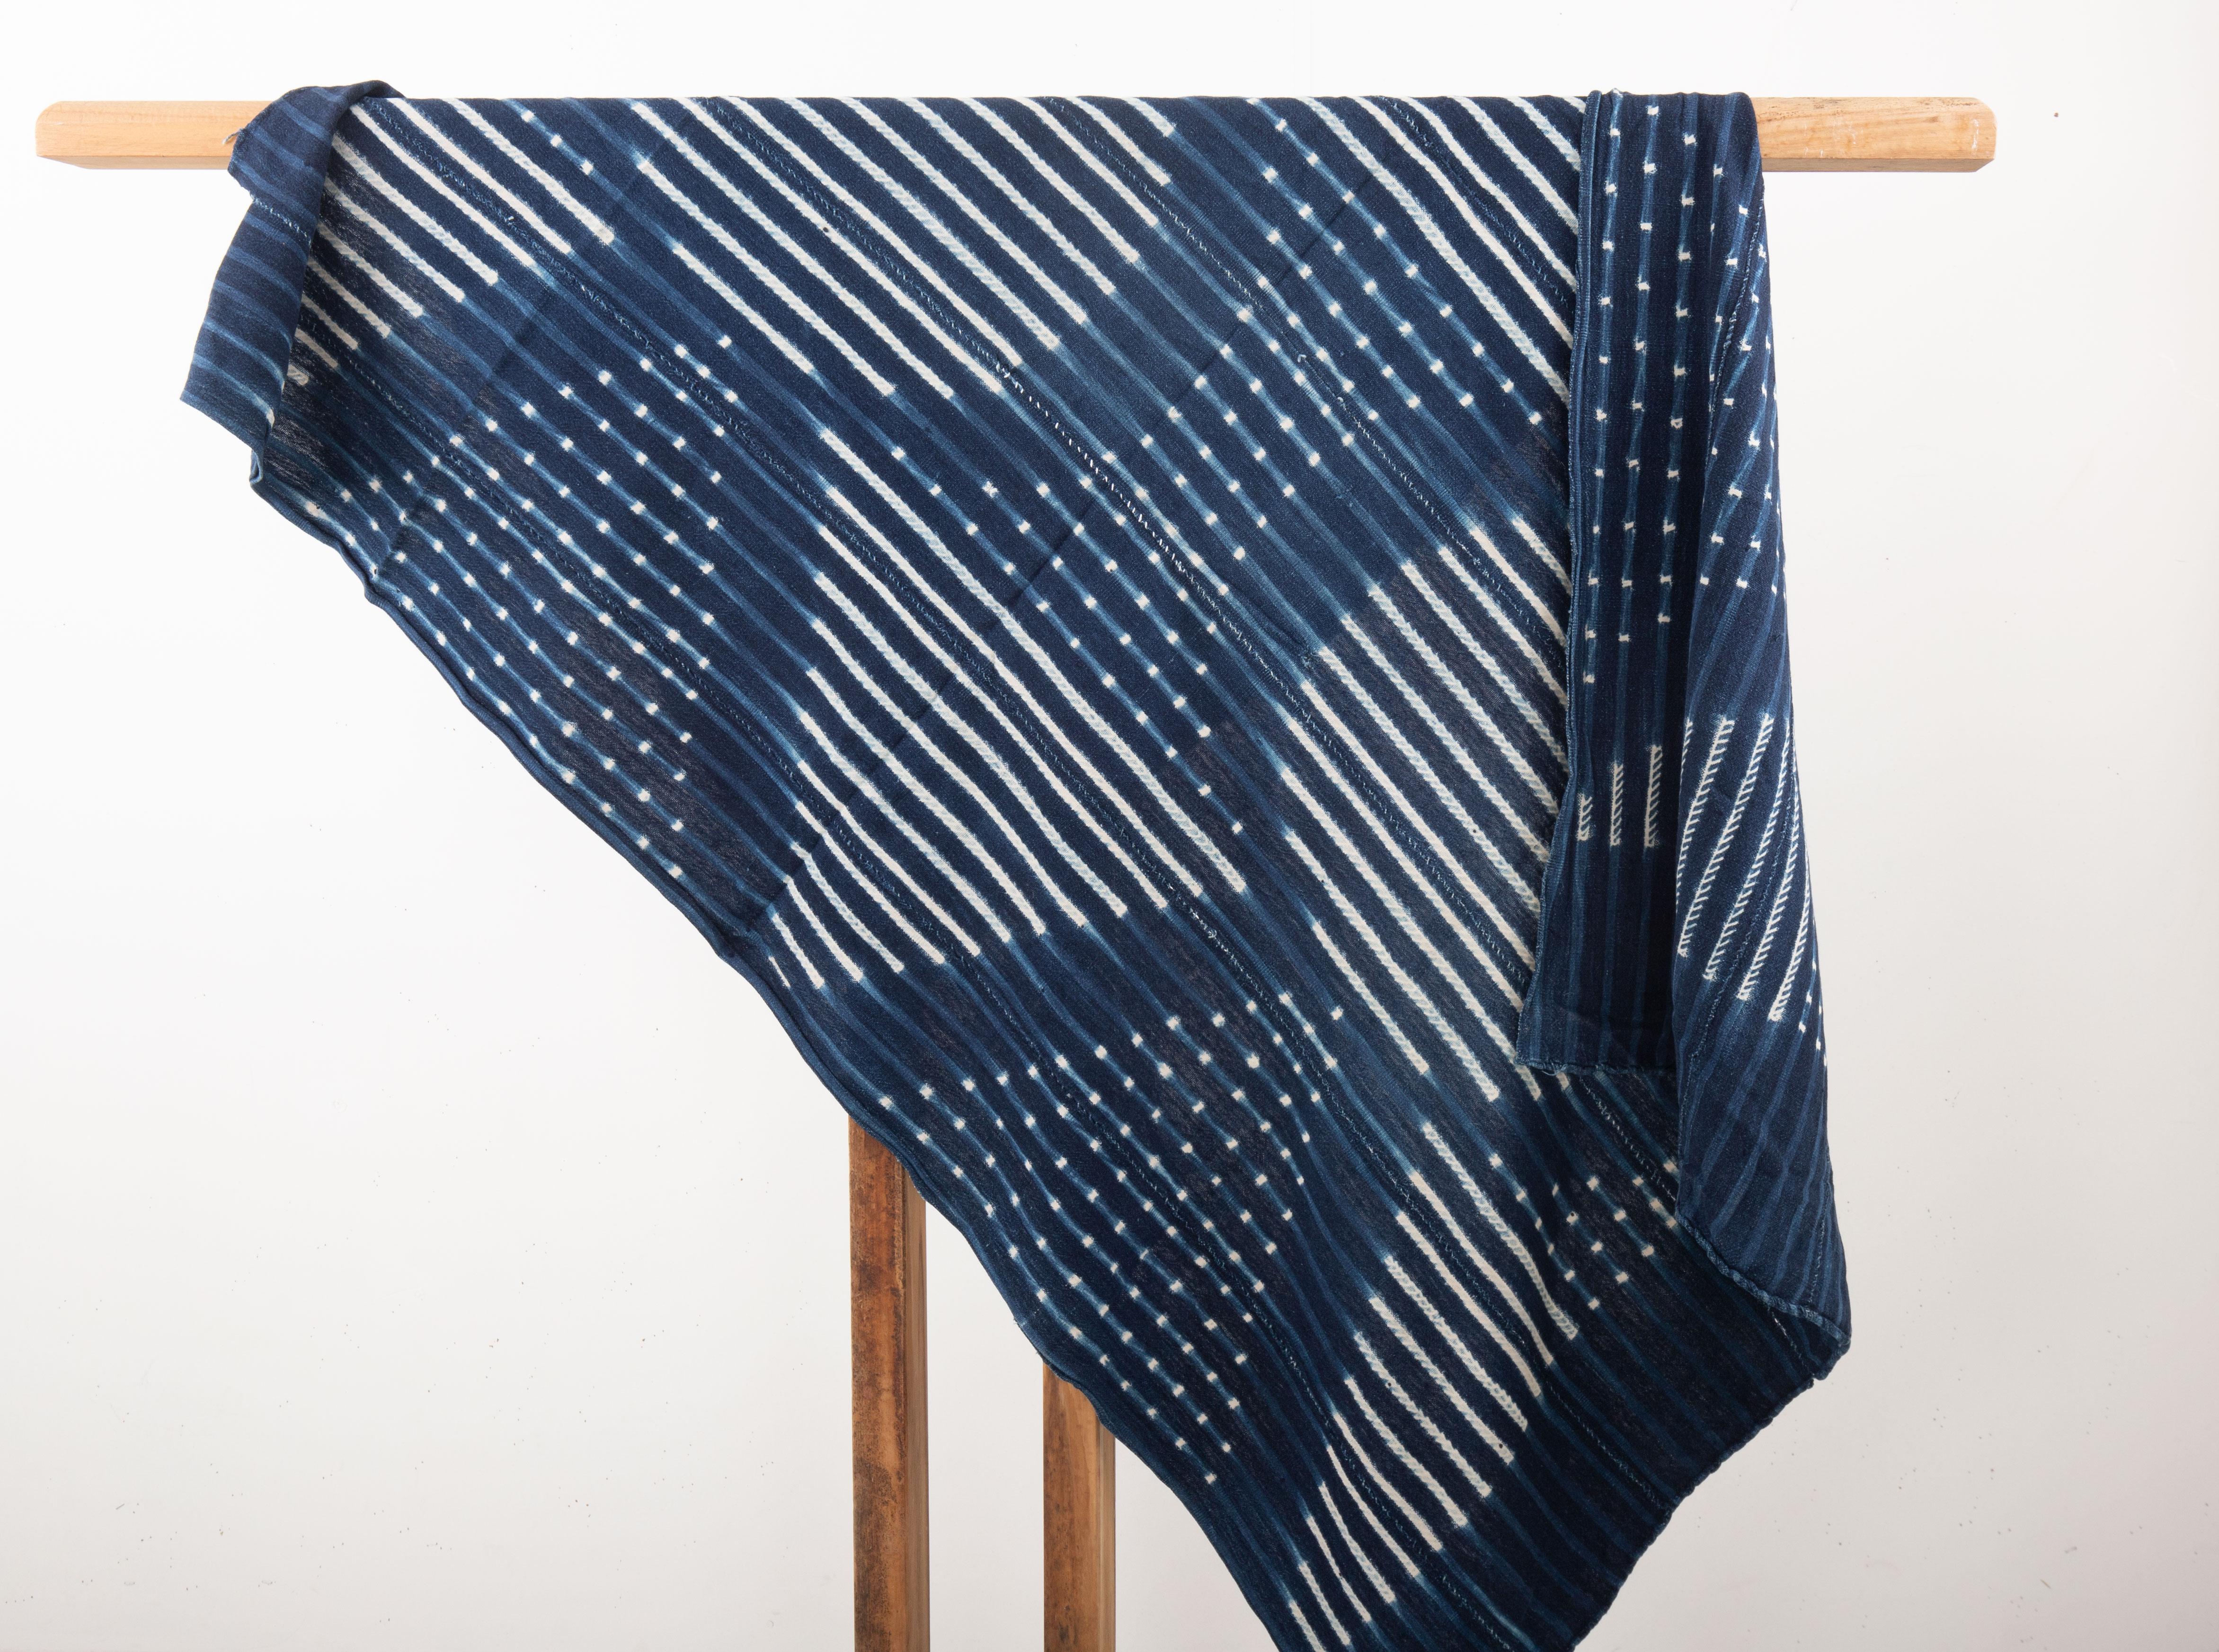 Mali indigo cloth refers to the traditional textiles produced in Mali, West Africa, using indigo dye. These fabrics are an integral part of Mali's rich cultural heritage and have gained international recognition for their distinctive blue hue and